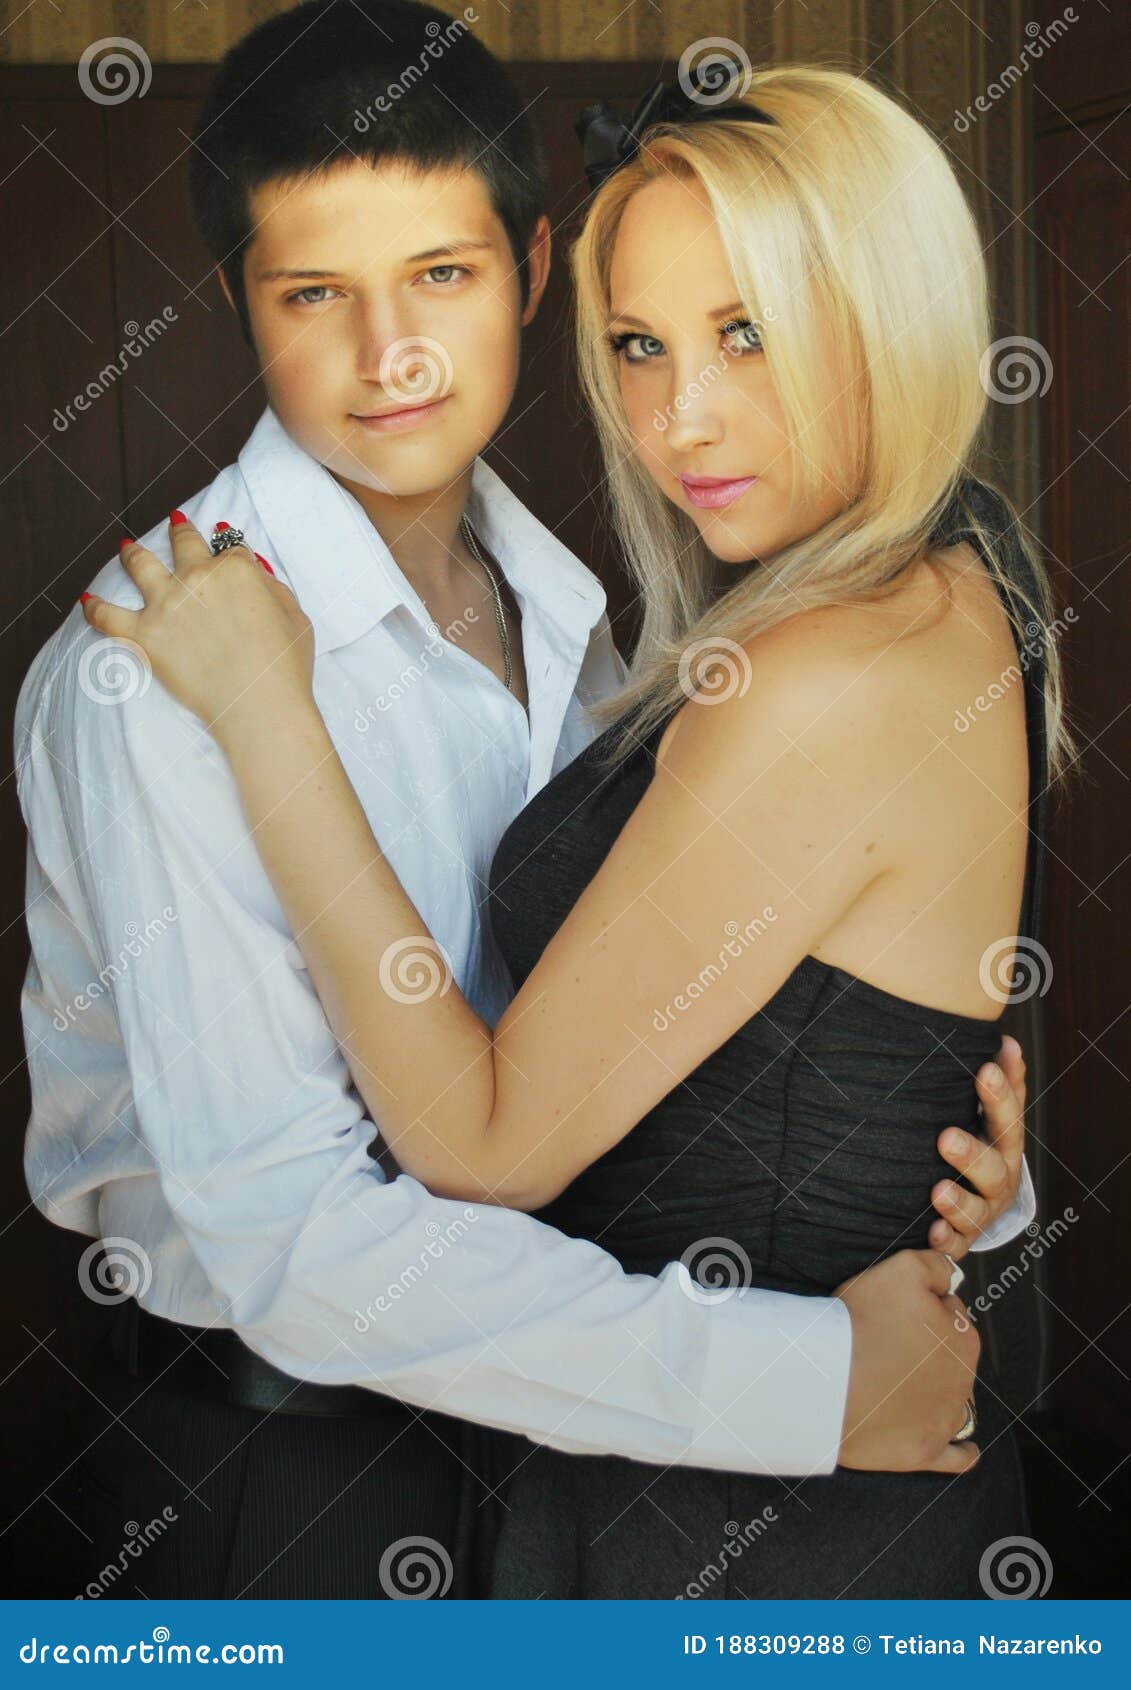 Man with younger in older woman love Can an